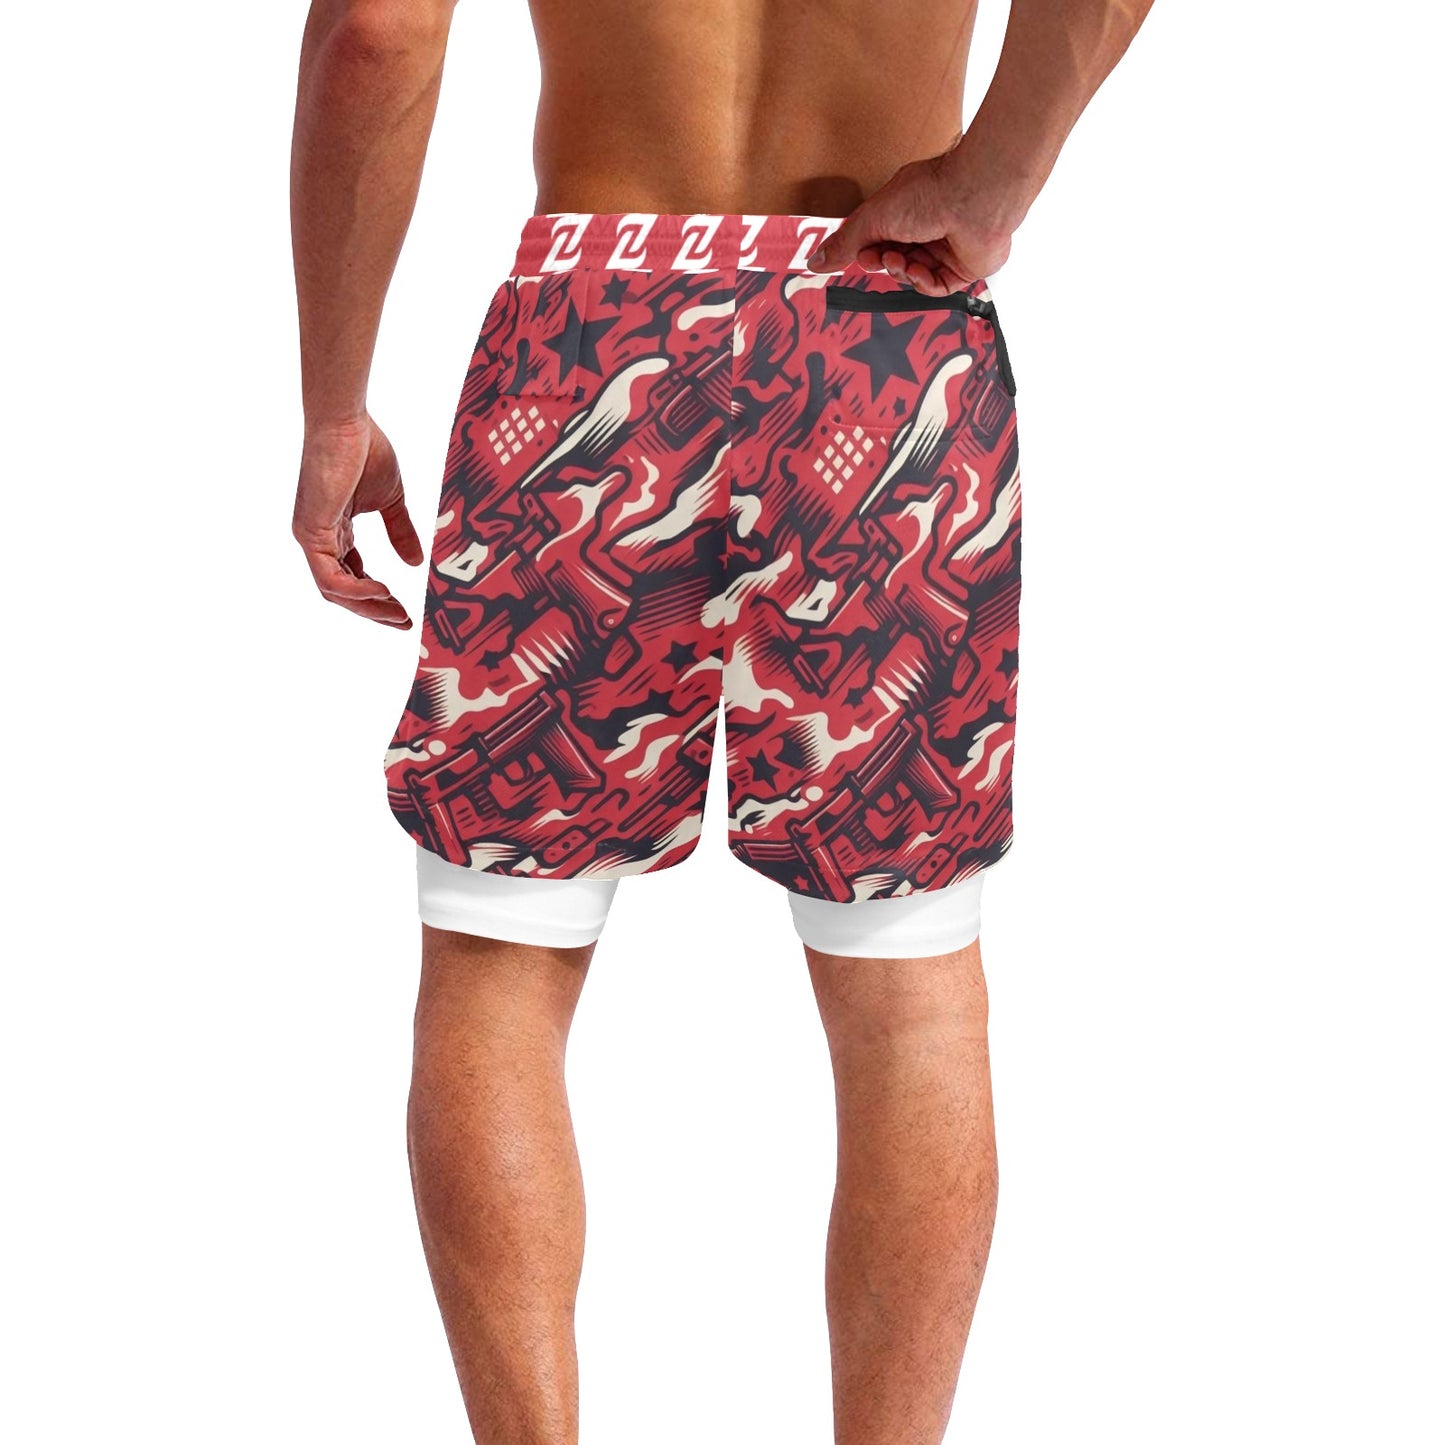 Zen Shorts with Liner - Red Camo